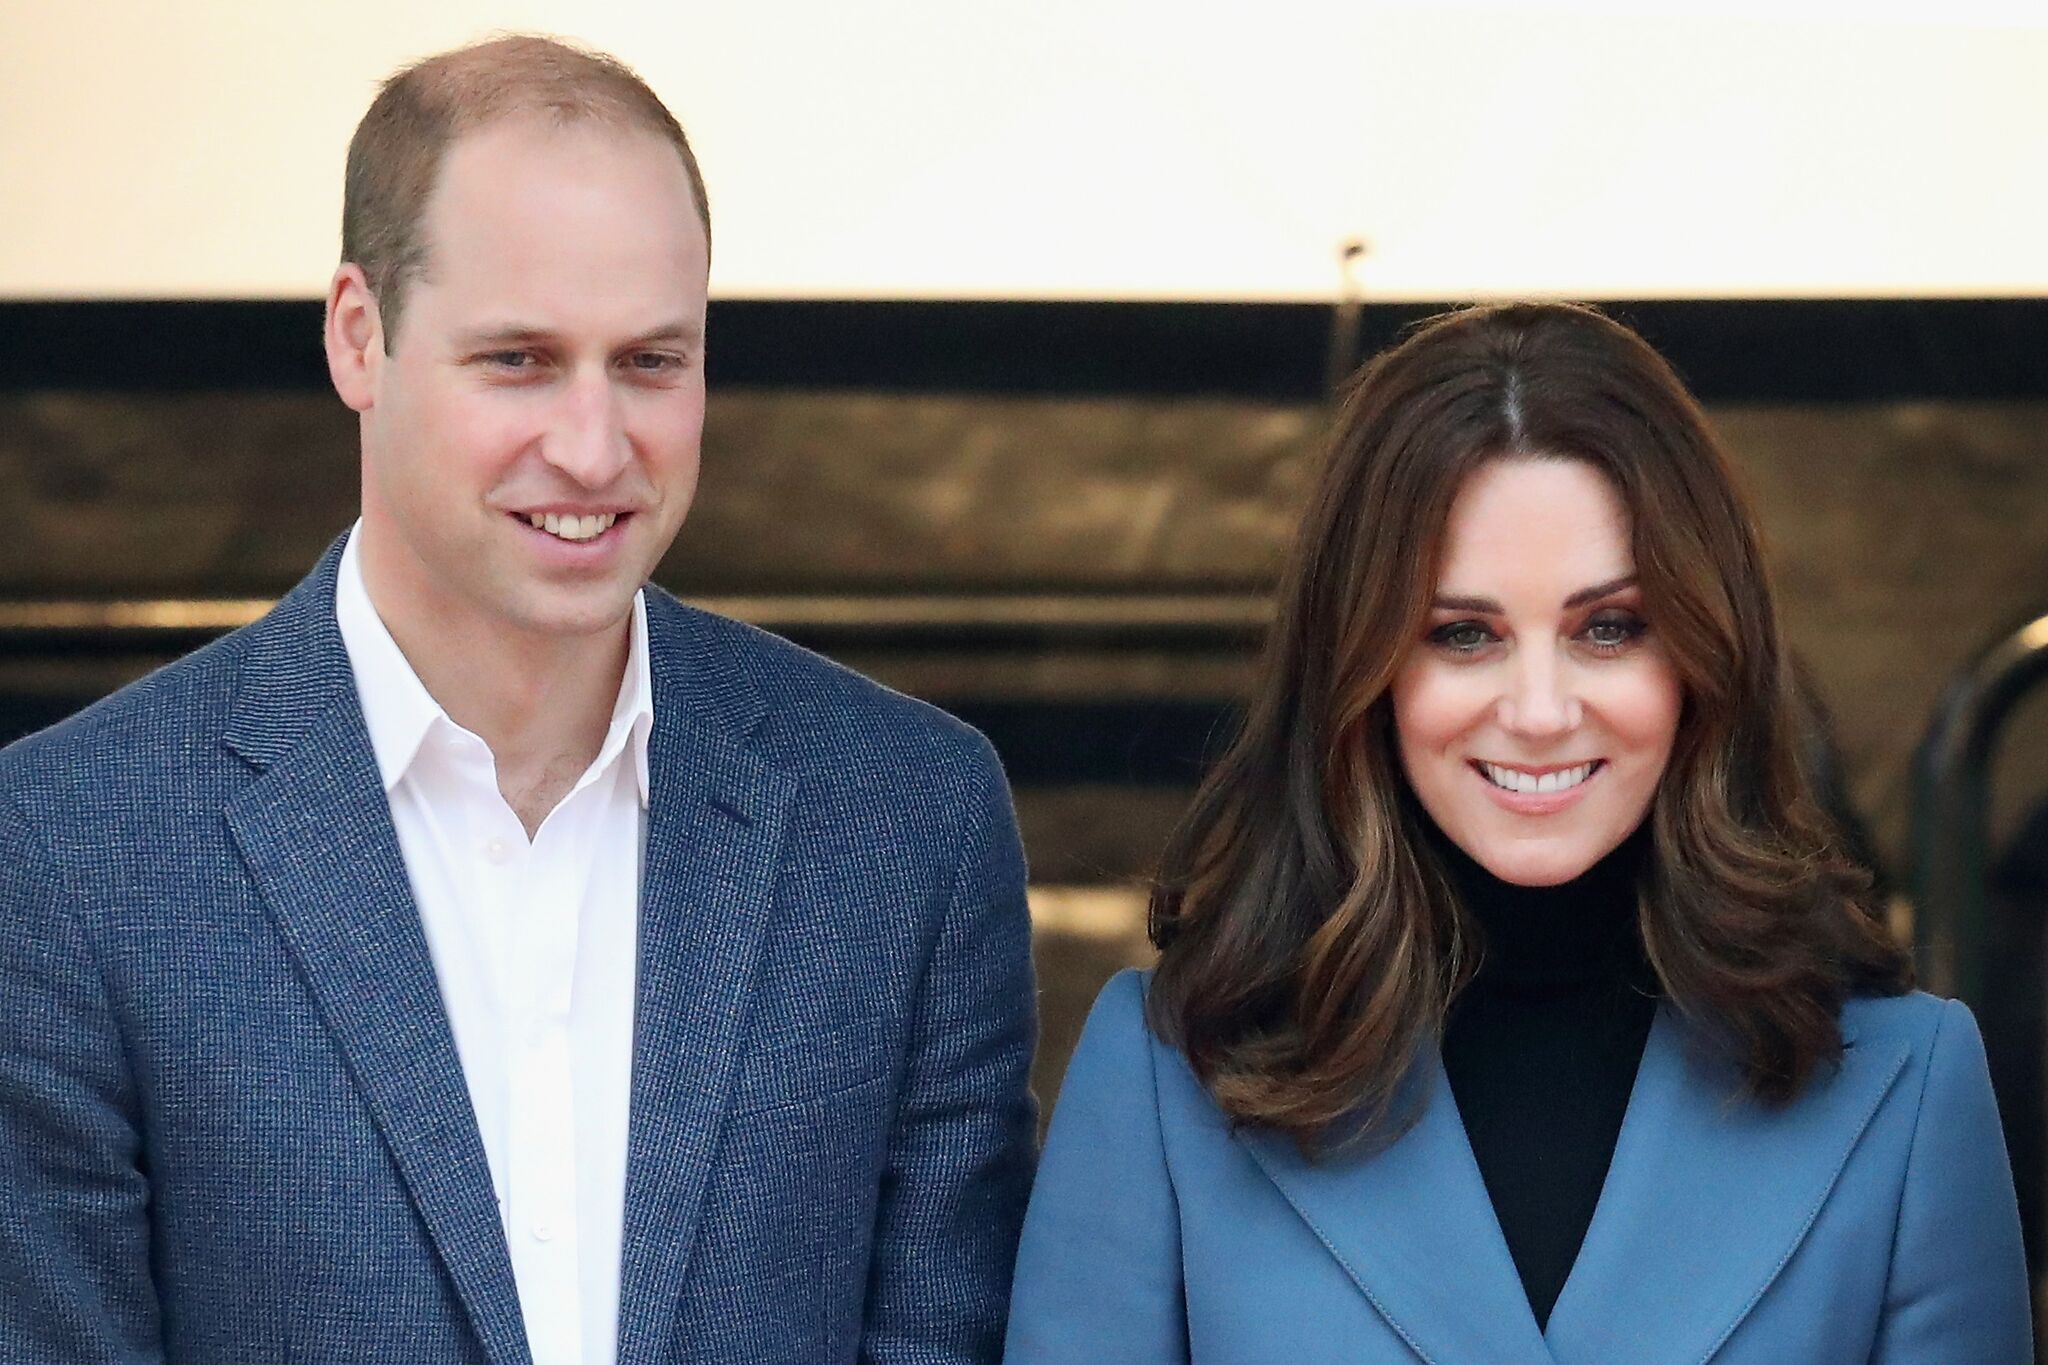 Prince William and Kate Middleton attend the Coach Core graduation ceremony at The London Stadium on October 18, 2017 in London, England | Photo: Getty Images